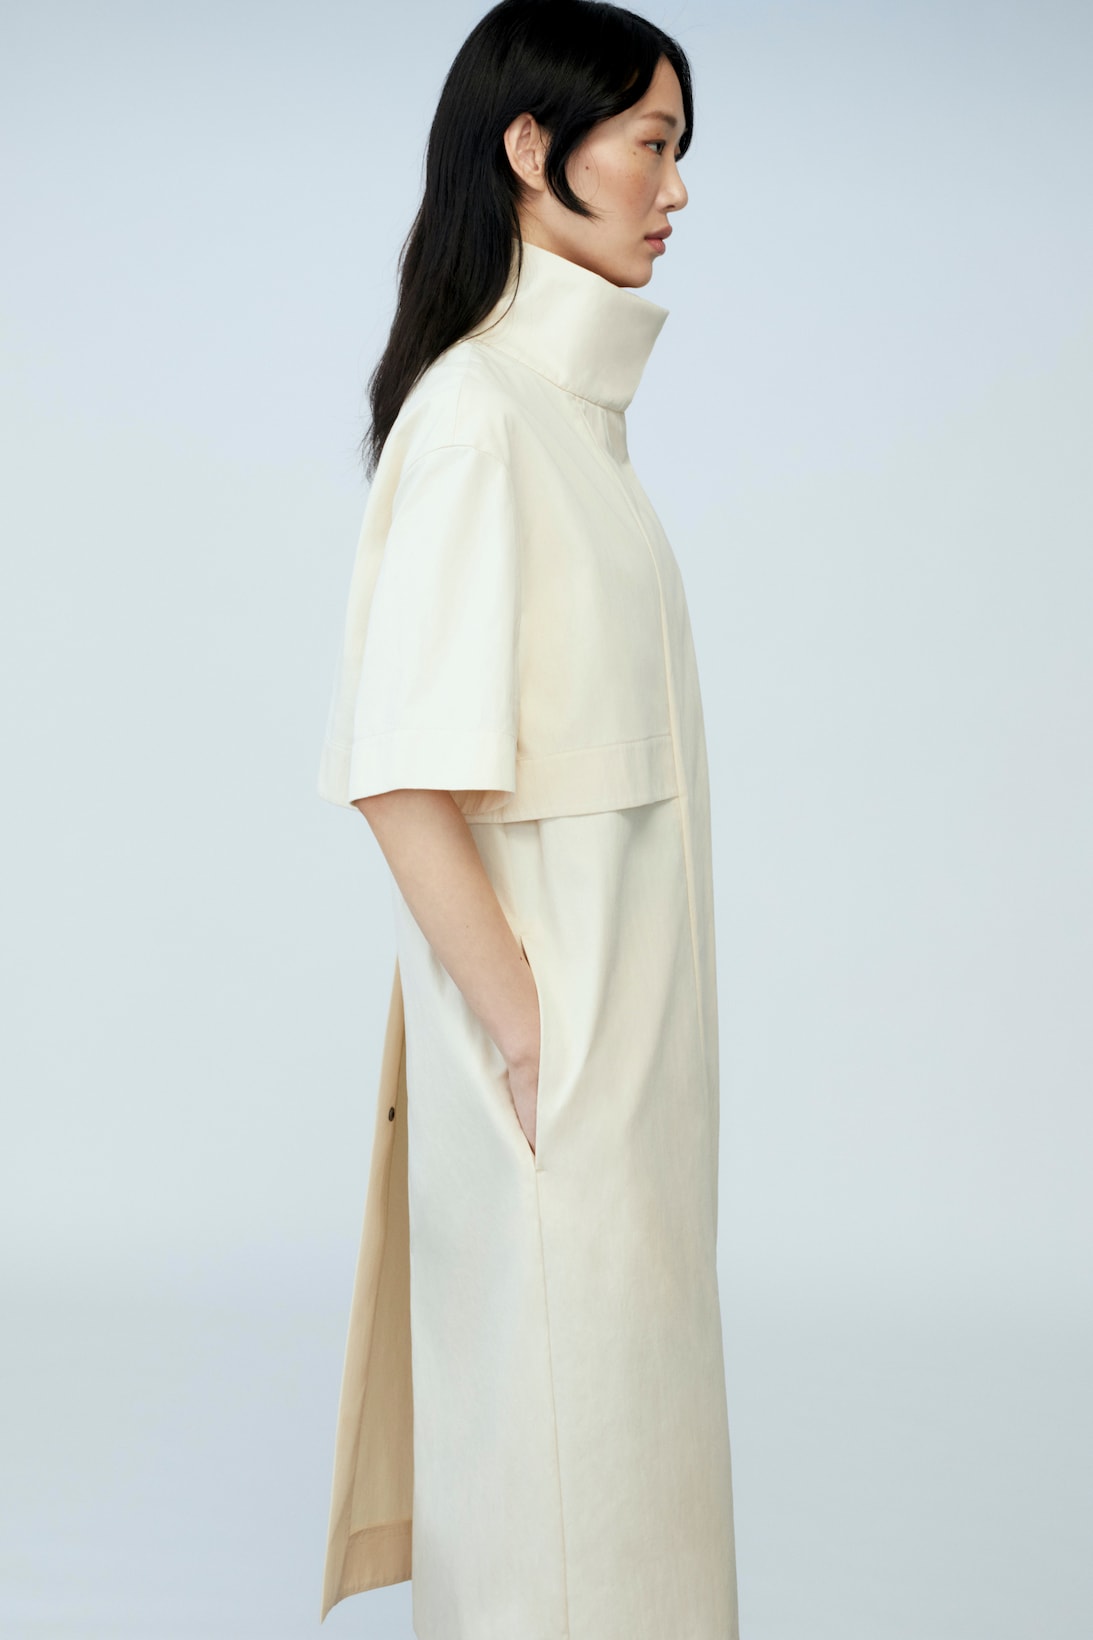 sora choi cos spring womenswear summer collection lookbook white turtle neck dress pockets